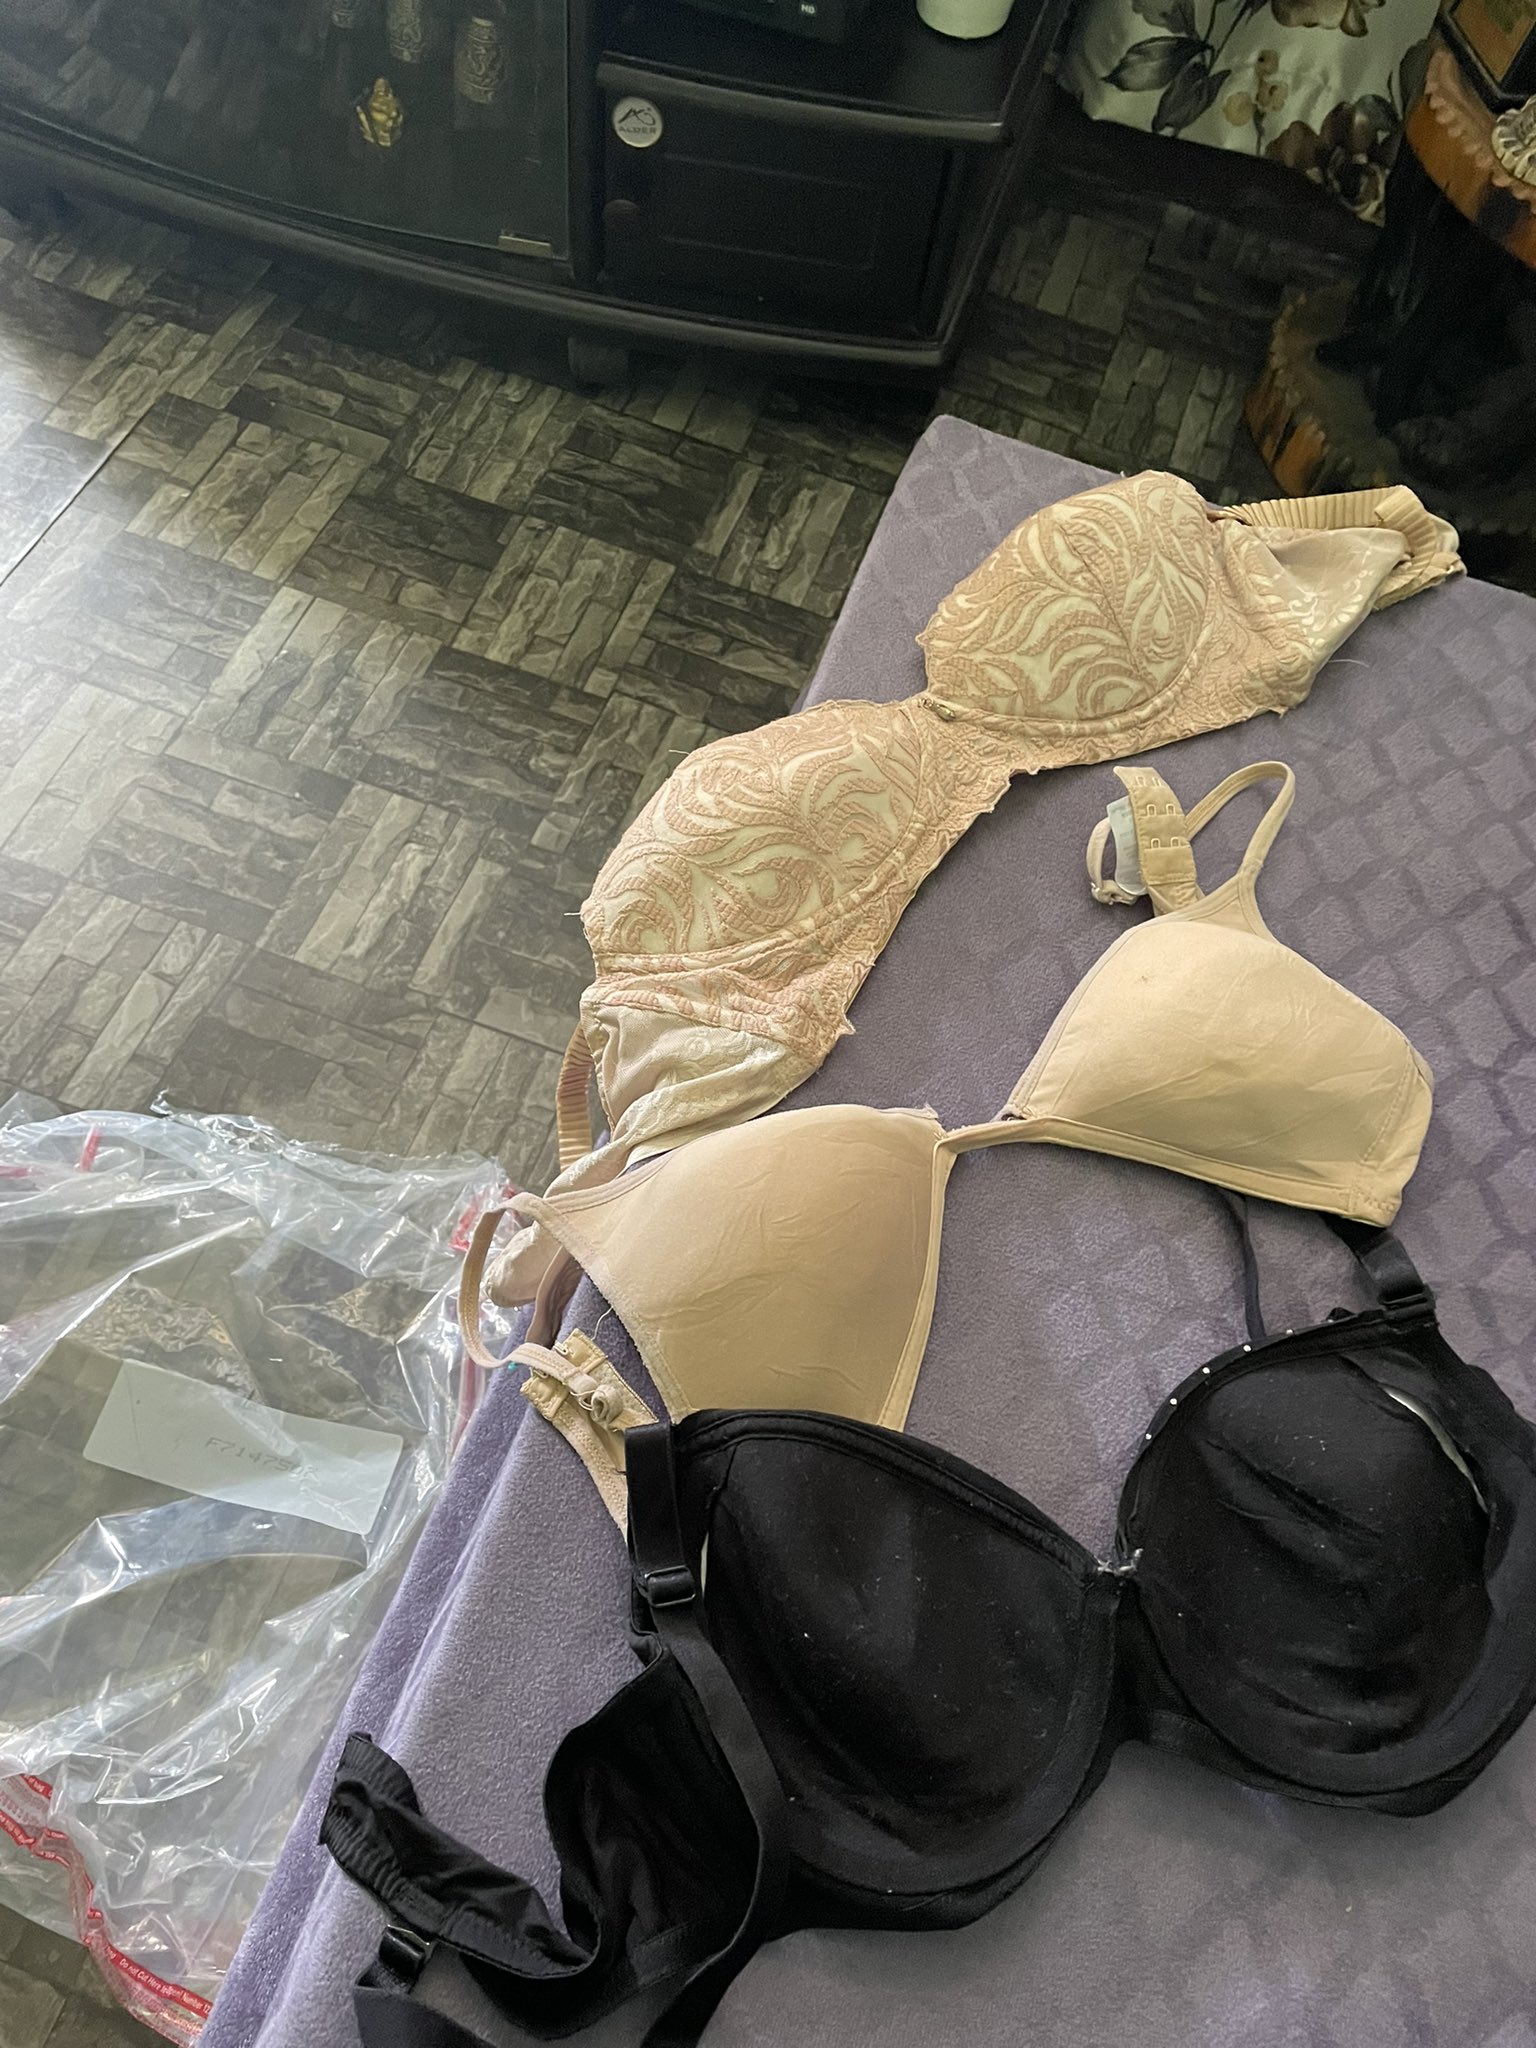 Yukar Sita Sangno on X: Very disappointed @IN I ordered brand new  Rudra fab bra set from your website, ironically I received an old torn  secondhand used bra, unhygienic products..😡😡😡  /